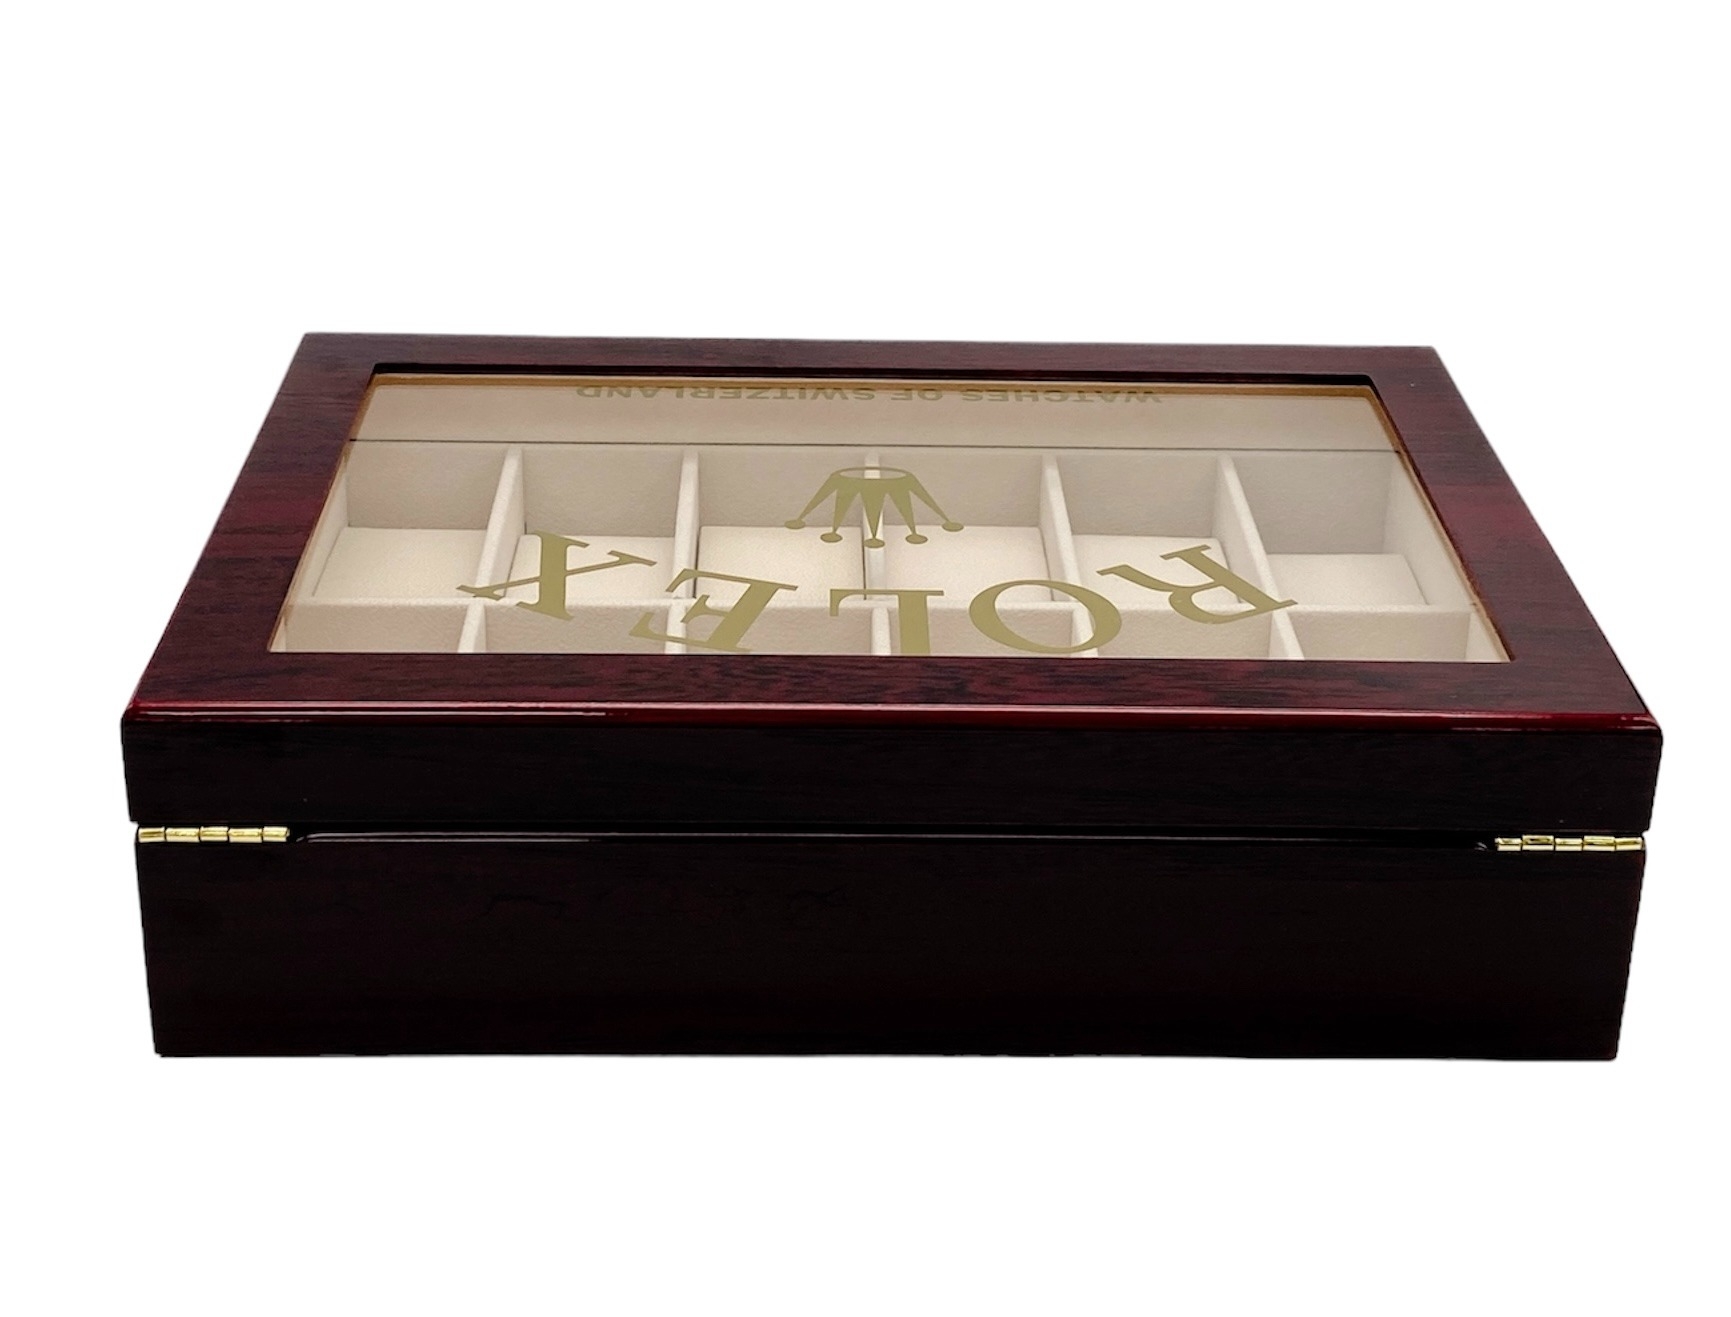 An Unused 12 Watch Display Case. Perfect for Rolex watches. 31.5 x 21.5 x 8.5cm. Rich Piano Finish. - Image 11 of 12